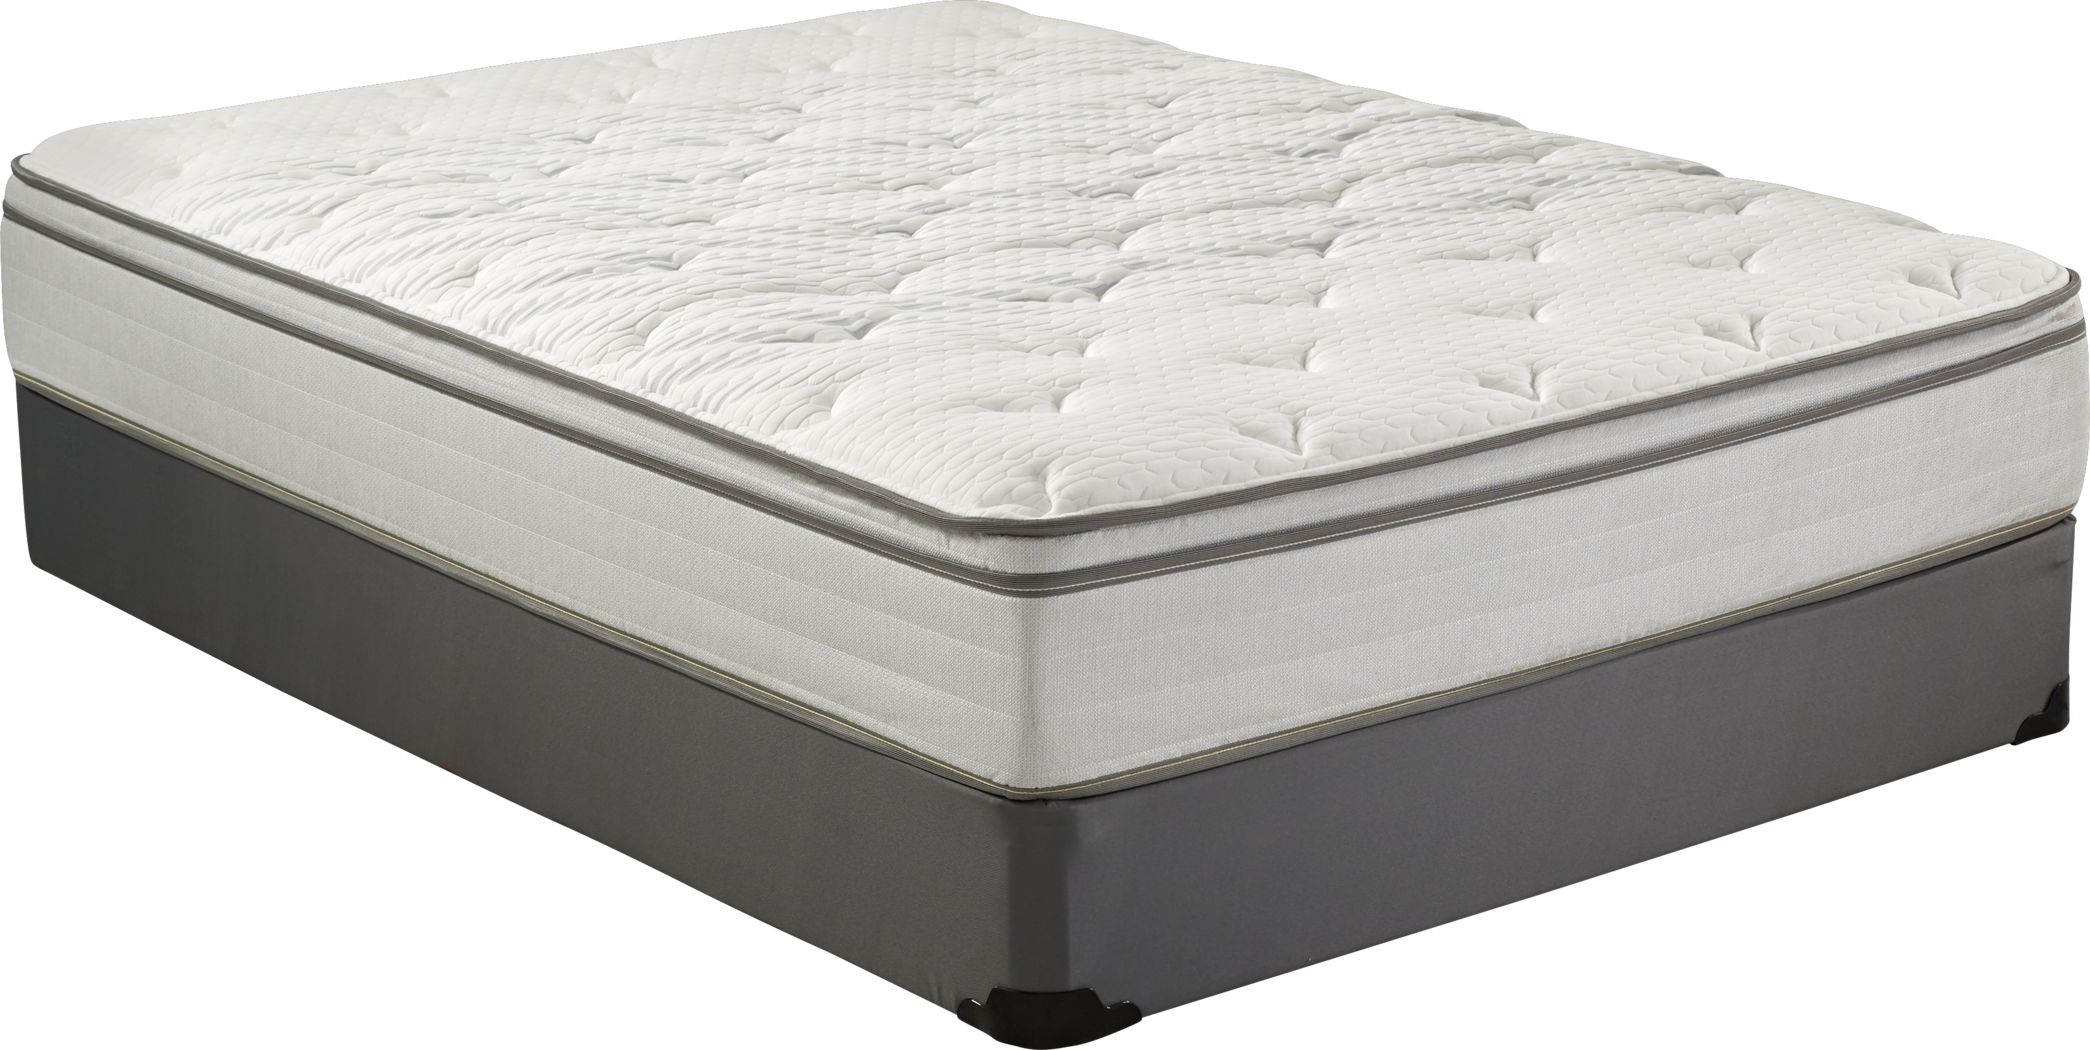 twin mattress that moves up and down